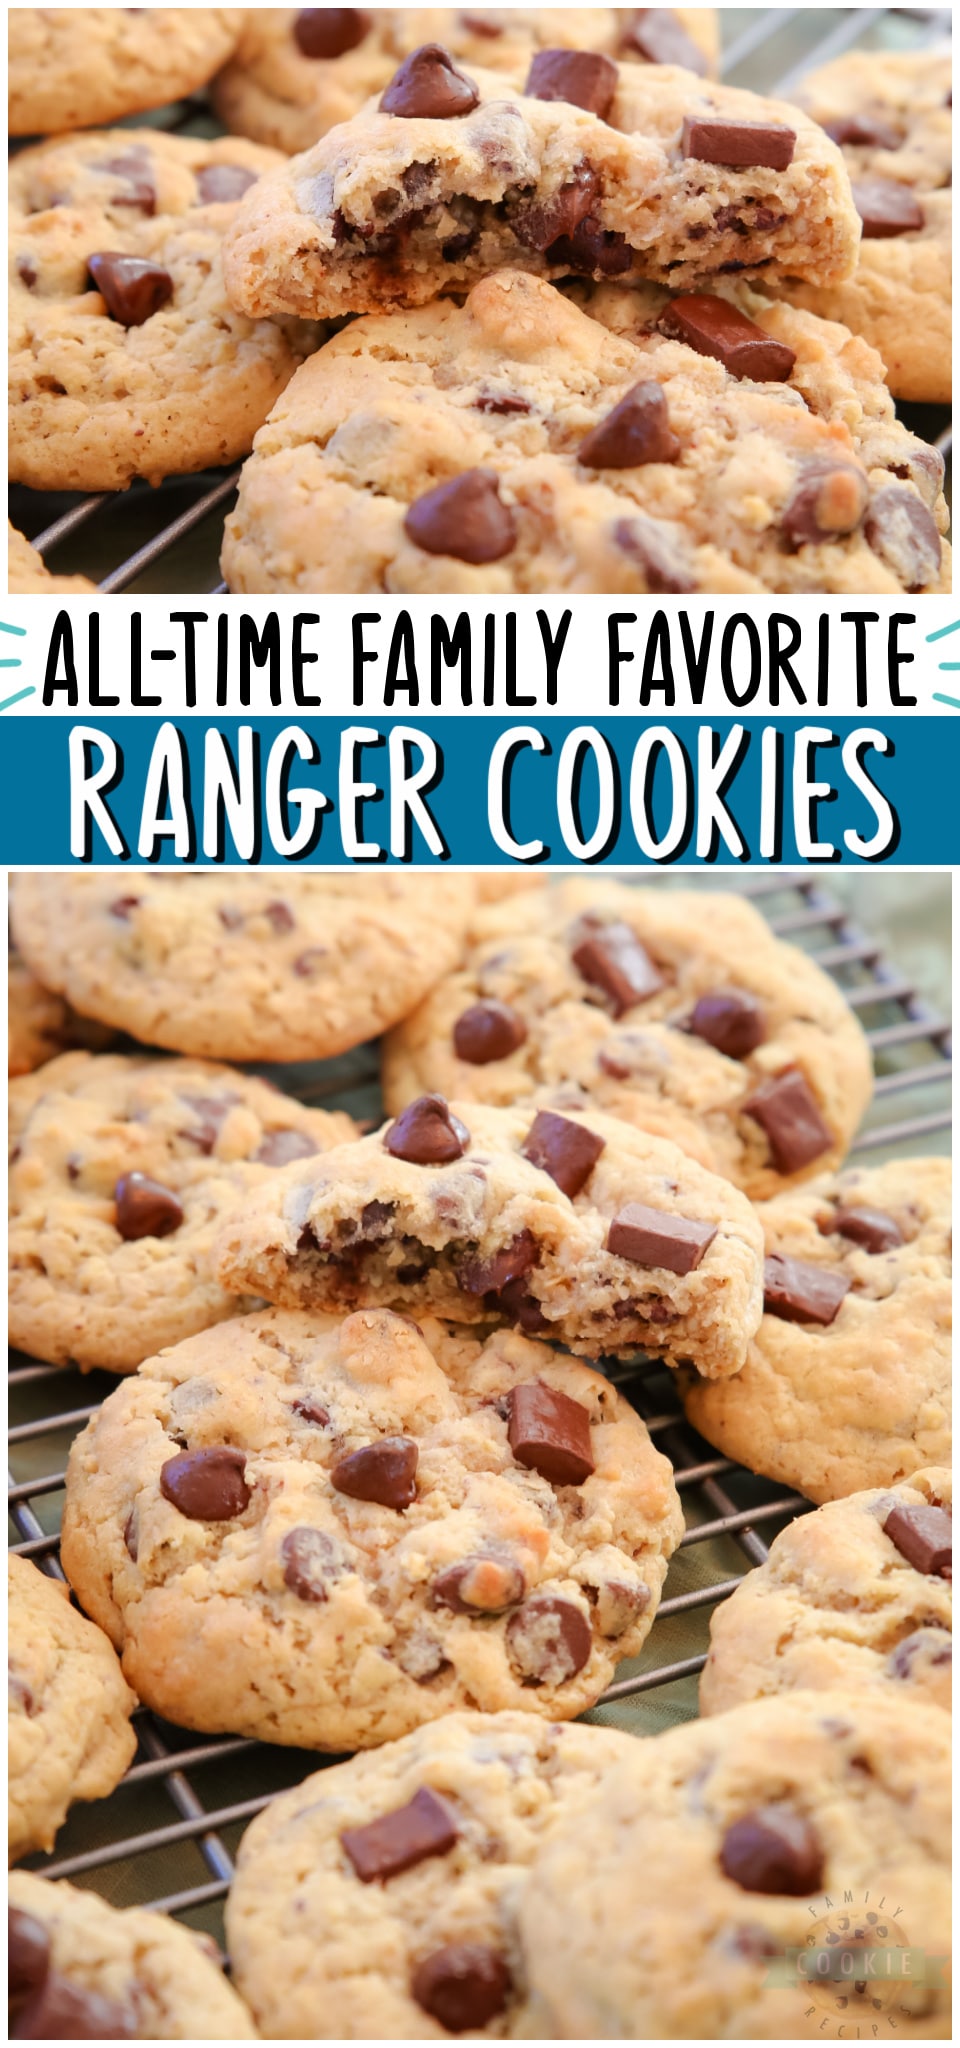 Simple Ranger Cookie recipe made with quick oats and lots of chocolate chips! Soft & chewy chocolate chip cookie with added oats for fantastic flavor & texture. #cookies #ranger #cowboy #oatmeal #baking #desserts #easyrecipe from FAMILY COOKIE RECIPES via @buttergirls